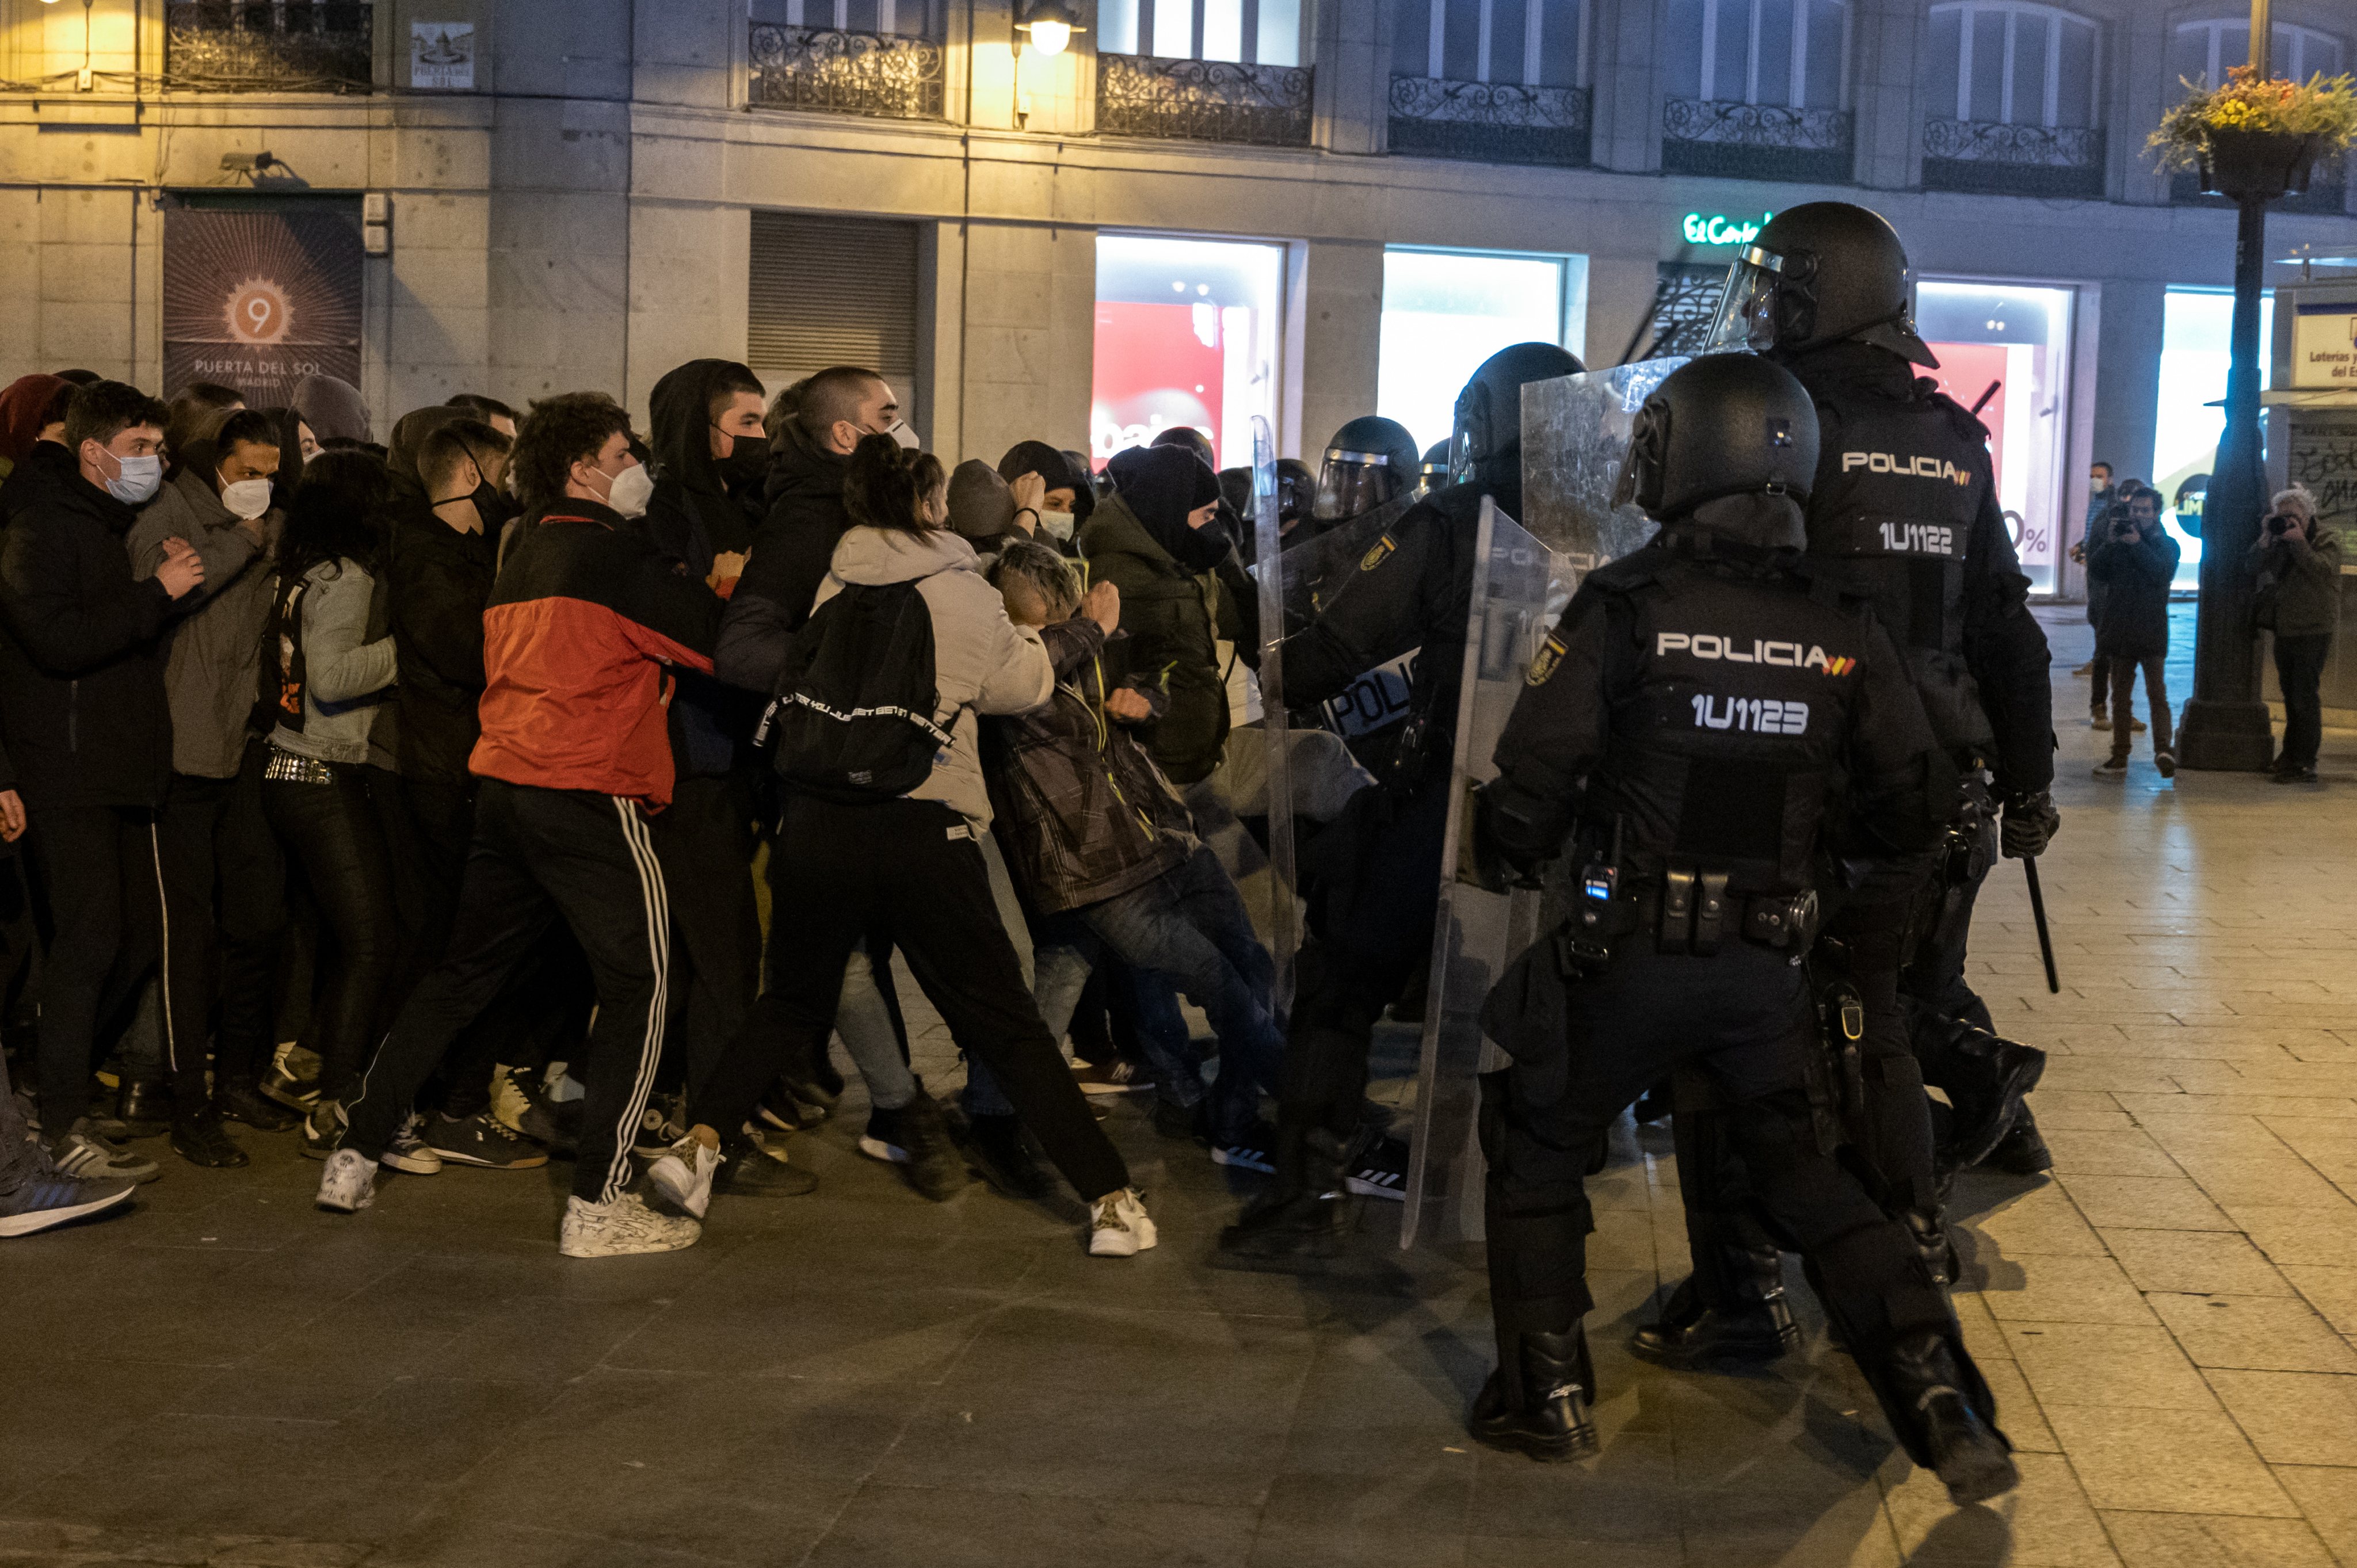 Riot police beating protesters during clashes in a